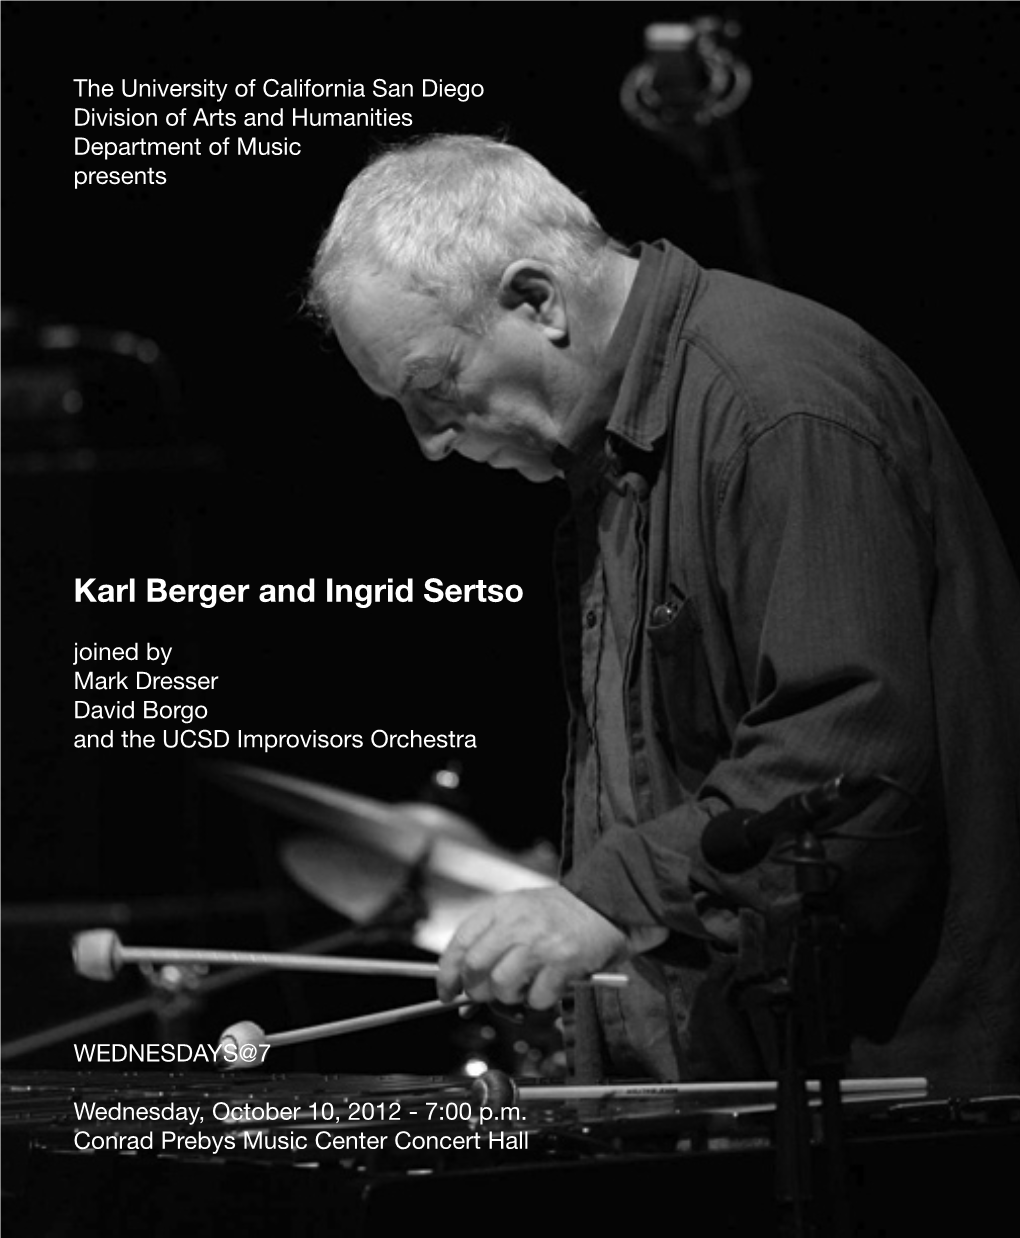 Karl Berger and Ingrid Sertso Joined by Mark Dresser David Borgo and the UCSD Improvisors Orchestra